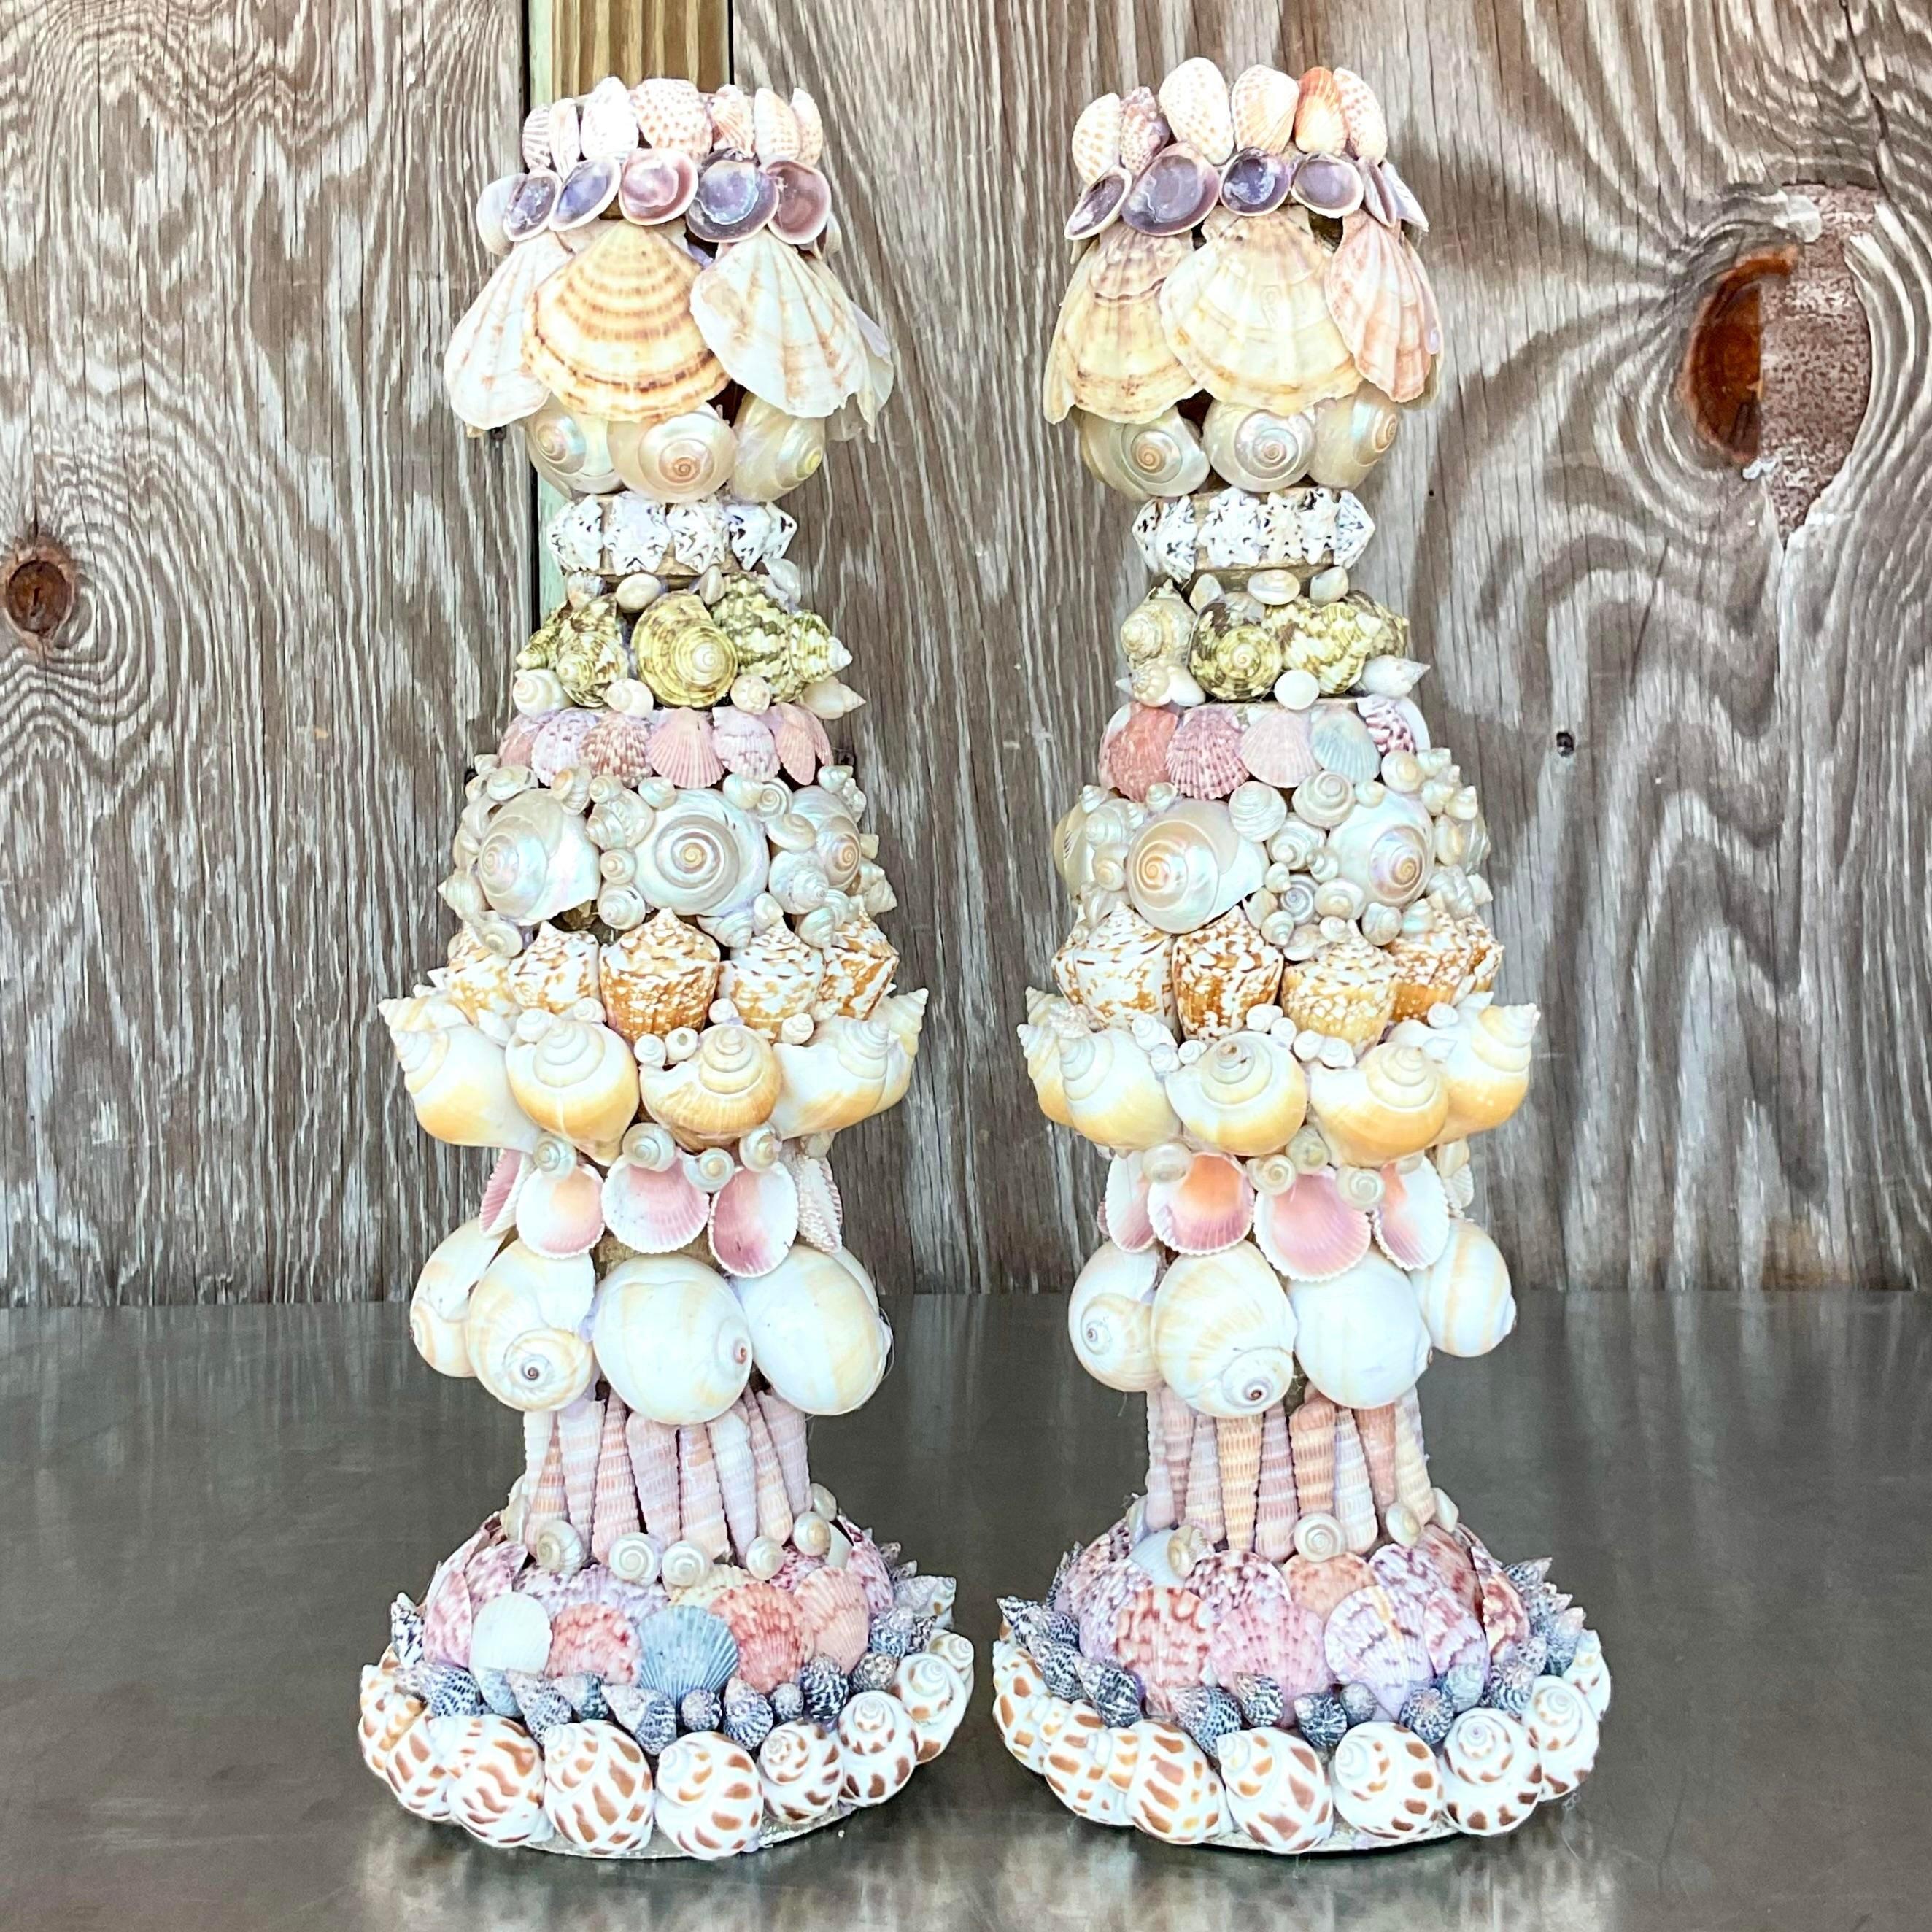 20th Century Vintage Coastal Shell Encrusted Candlesticks - a Pair For Sale